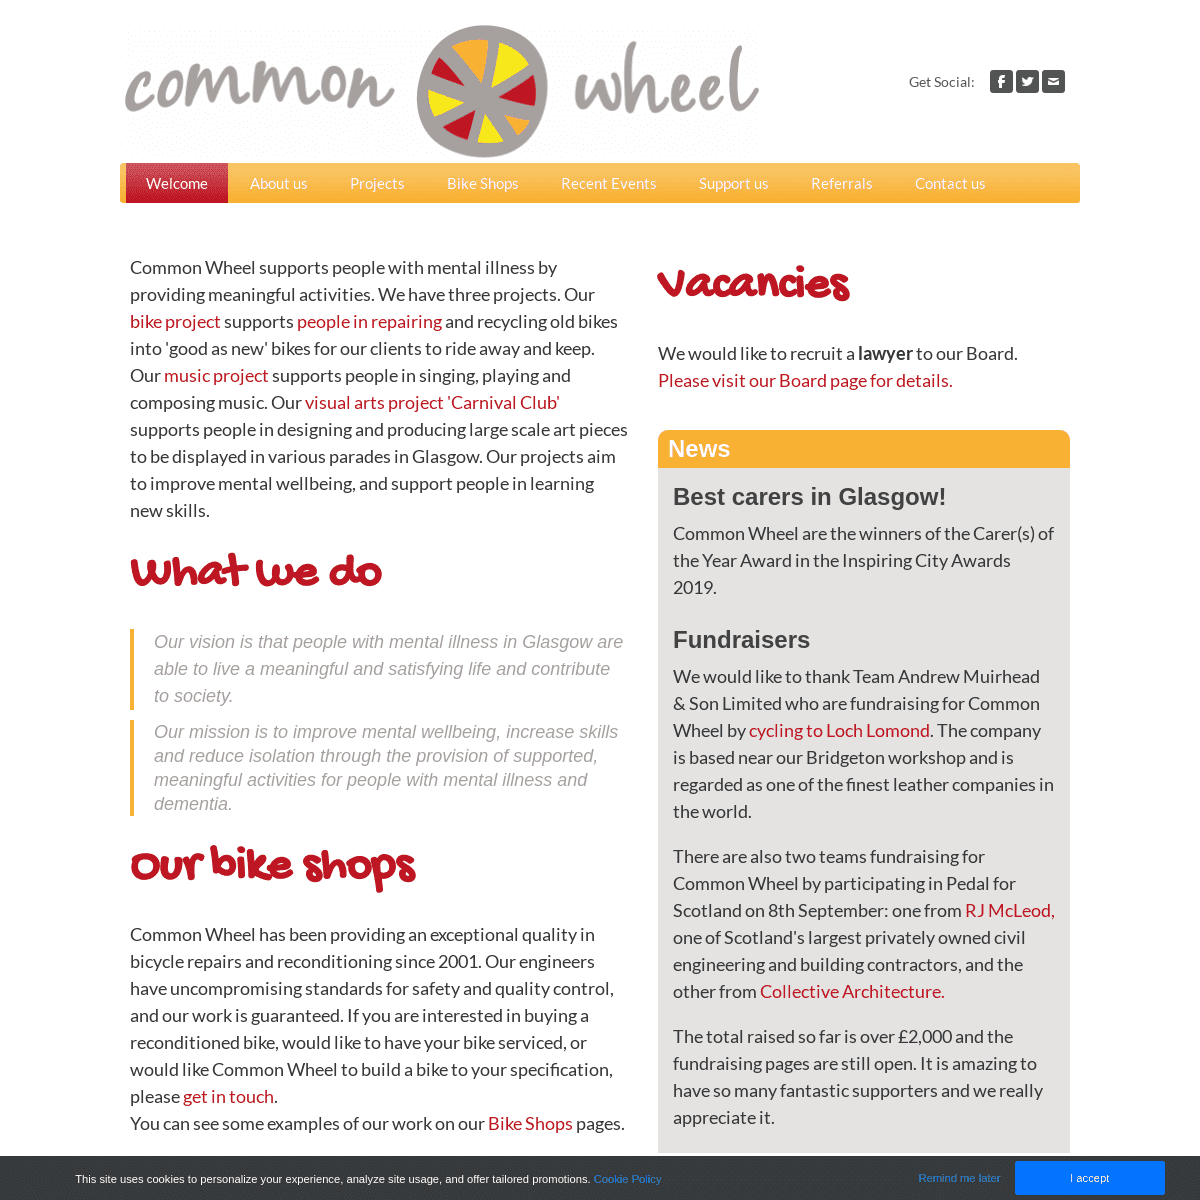 A complete backup of commonwheel.org.uk